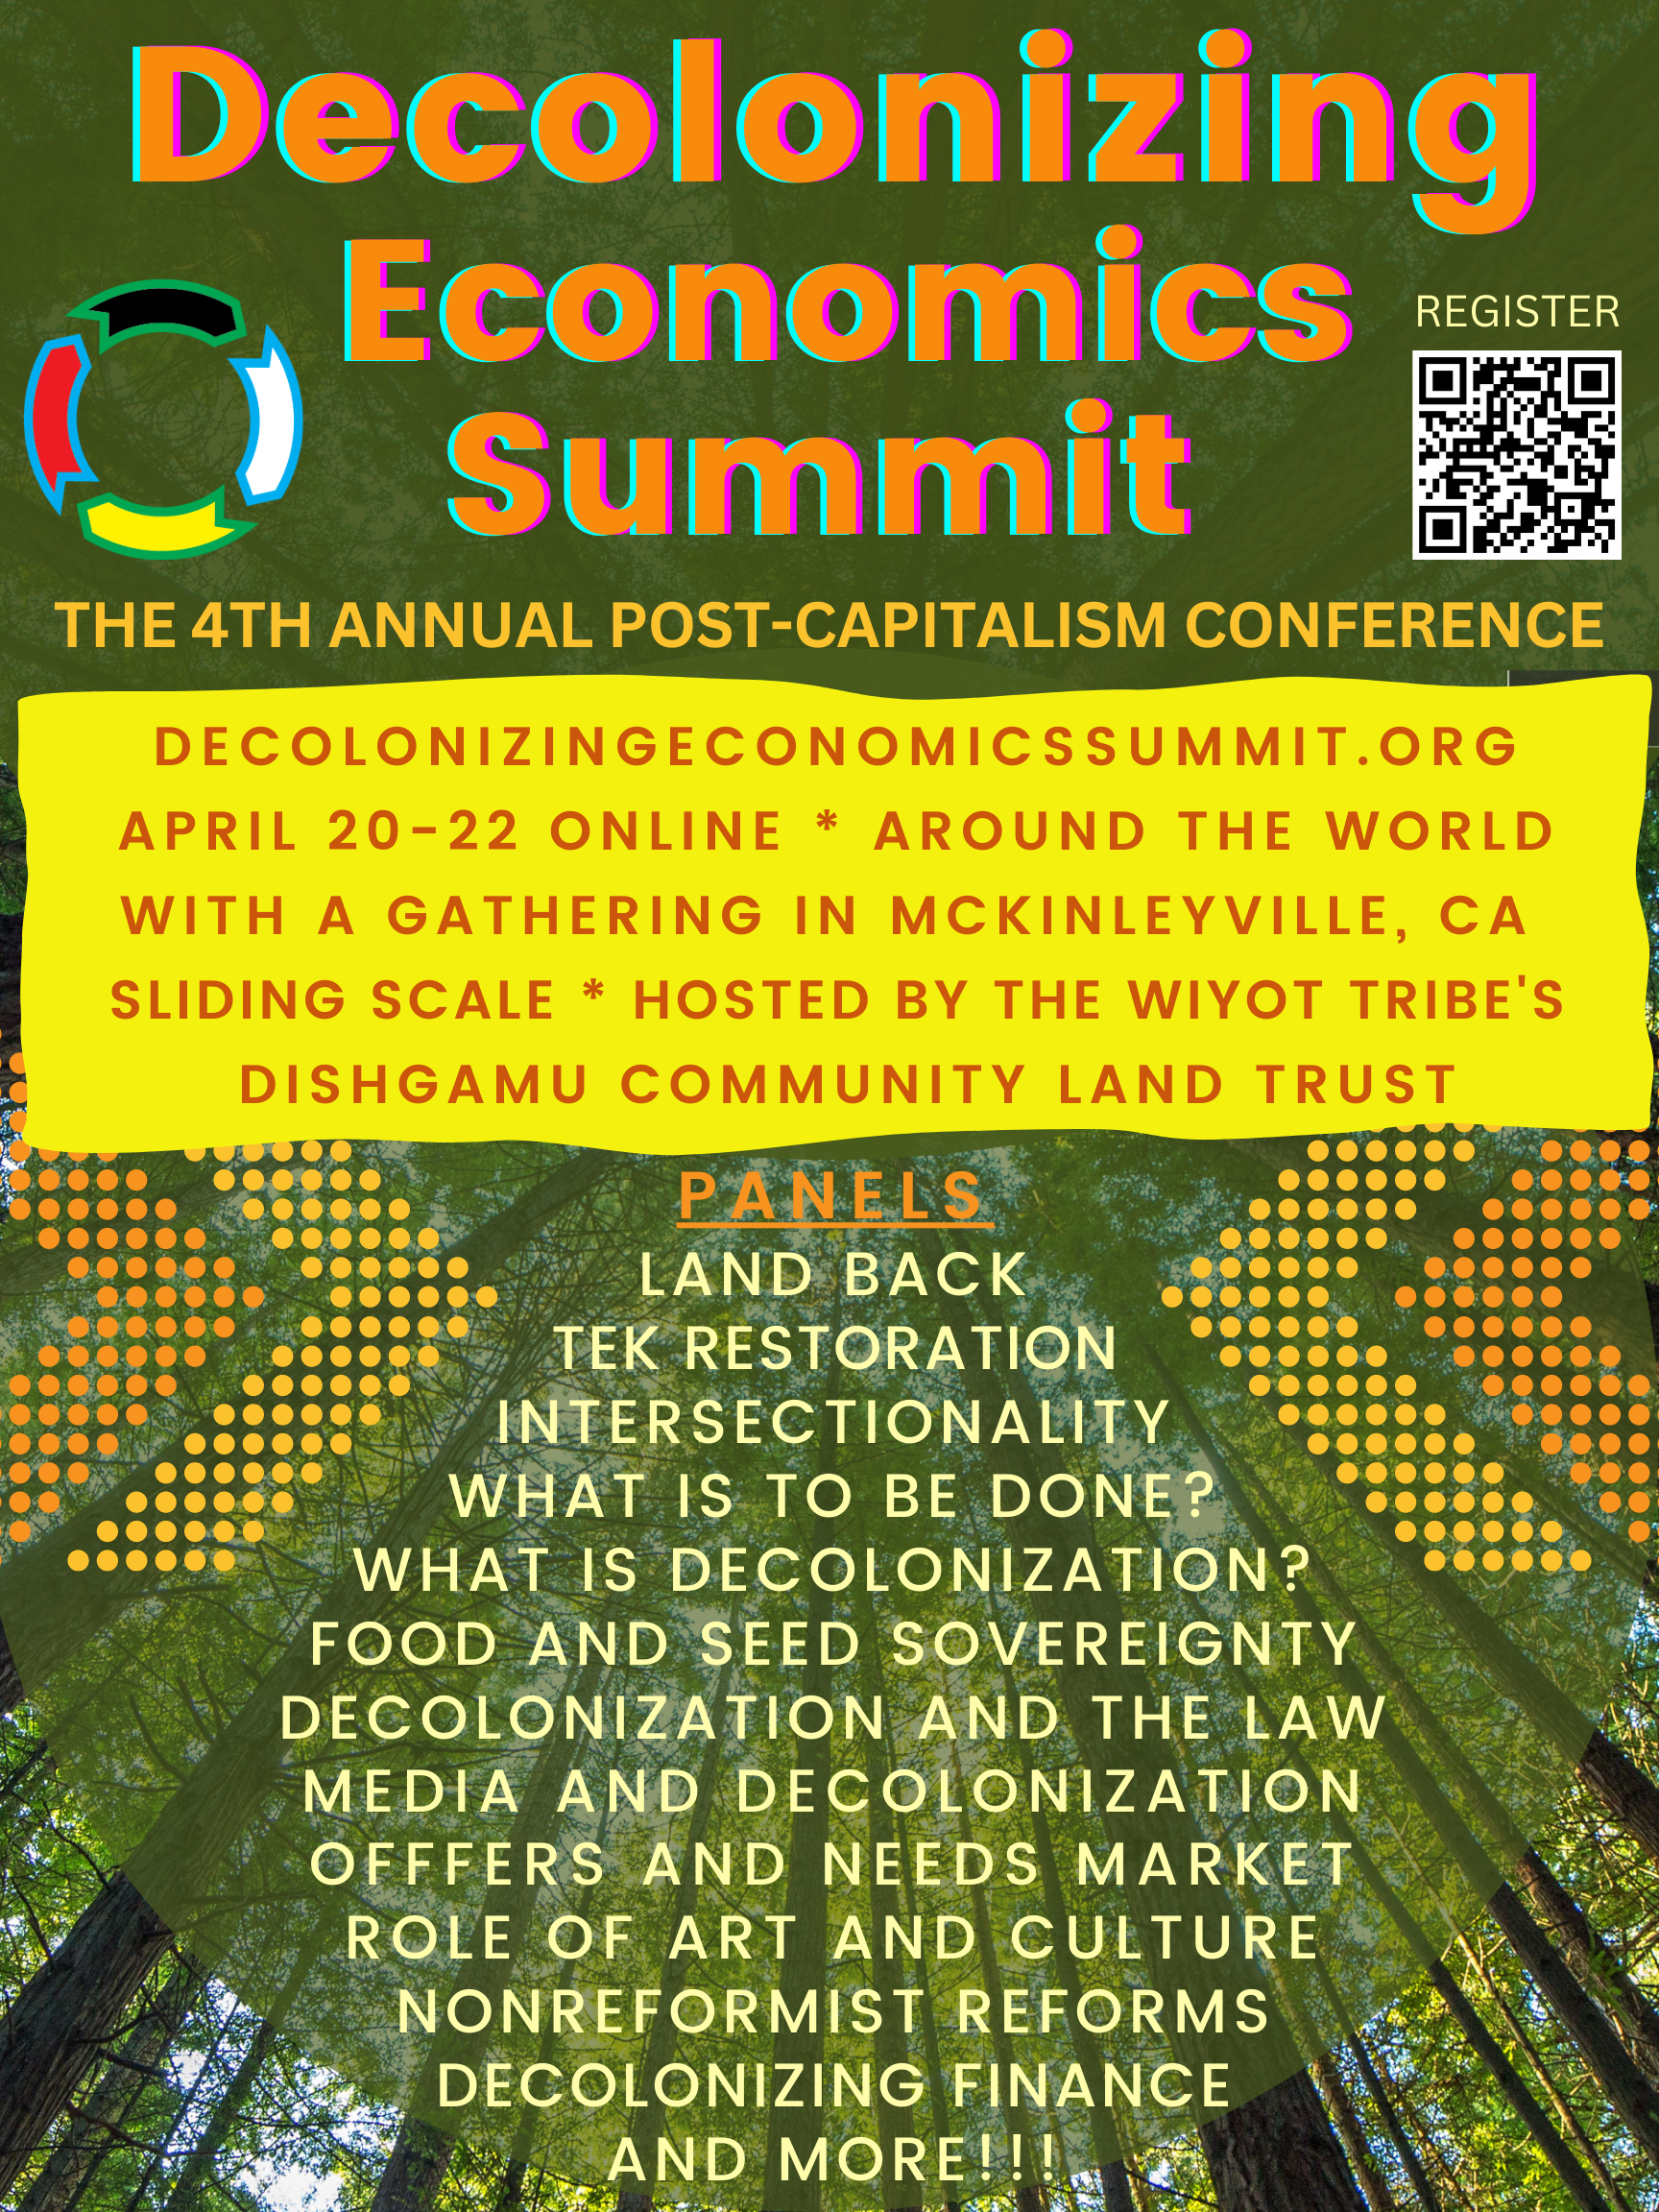 The Decolonizing Economics Summit/4th Annual Post-Capitalism Conference April 20-22 online with a gathering in McKinleyville, CA. Learn more and register at decolonizingeconomicssummit.org